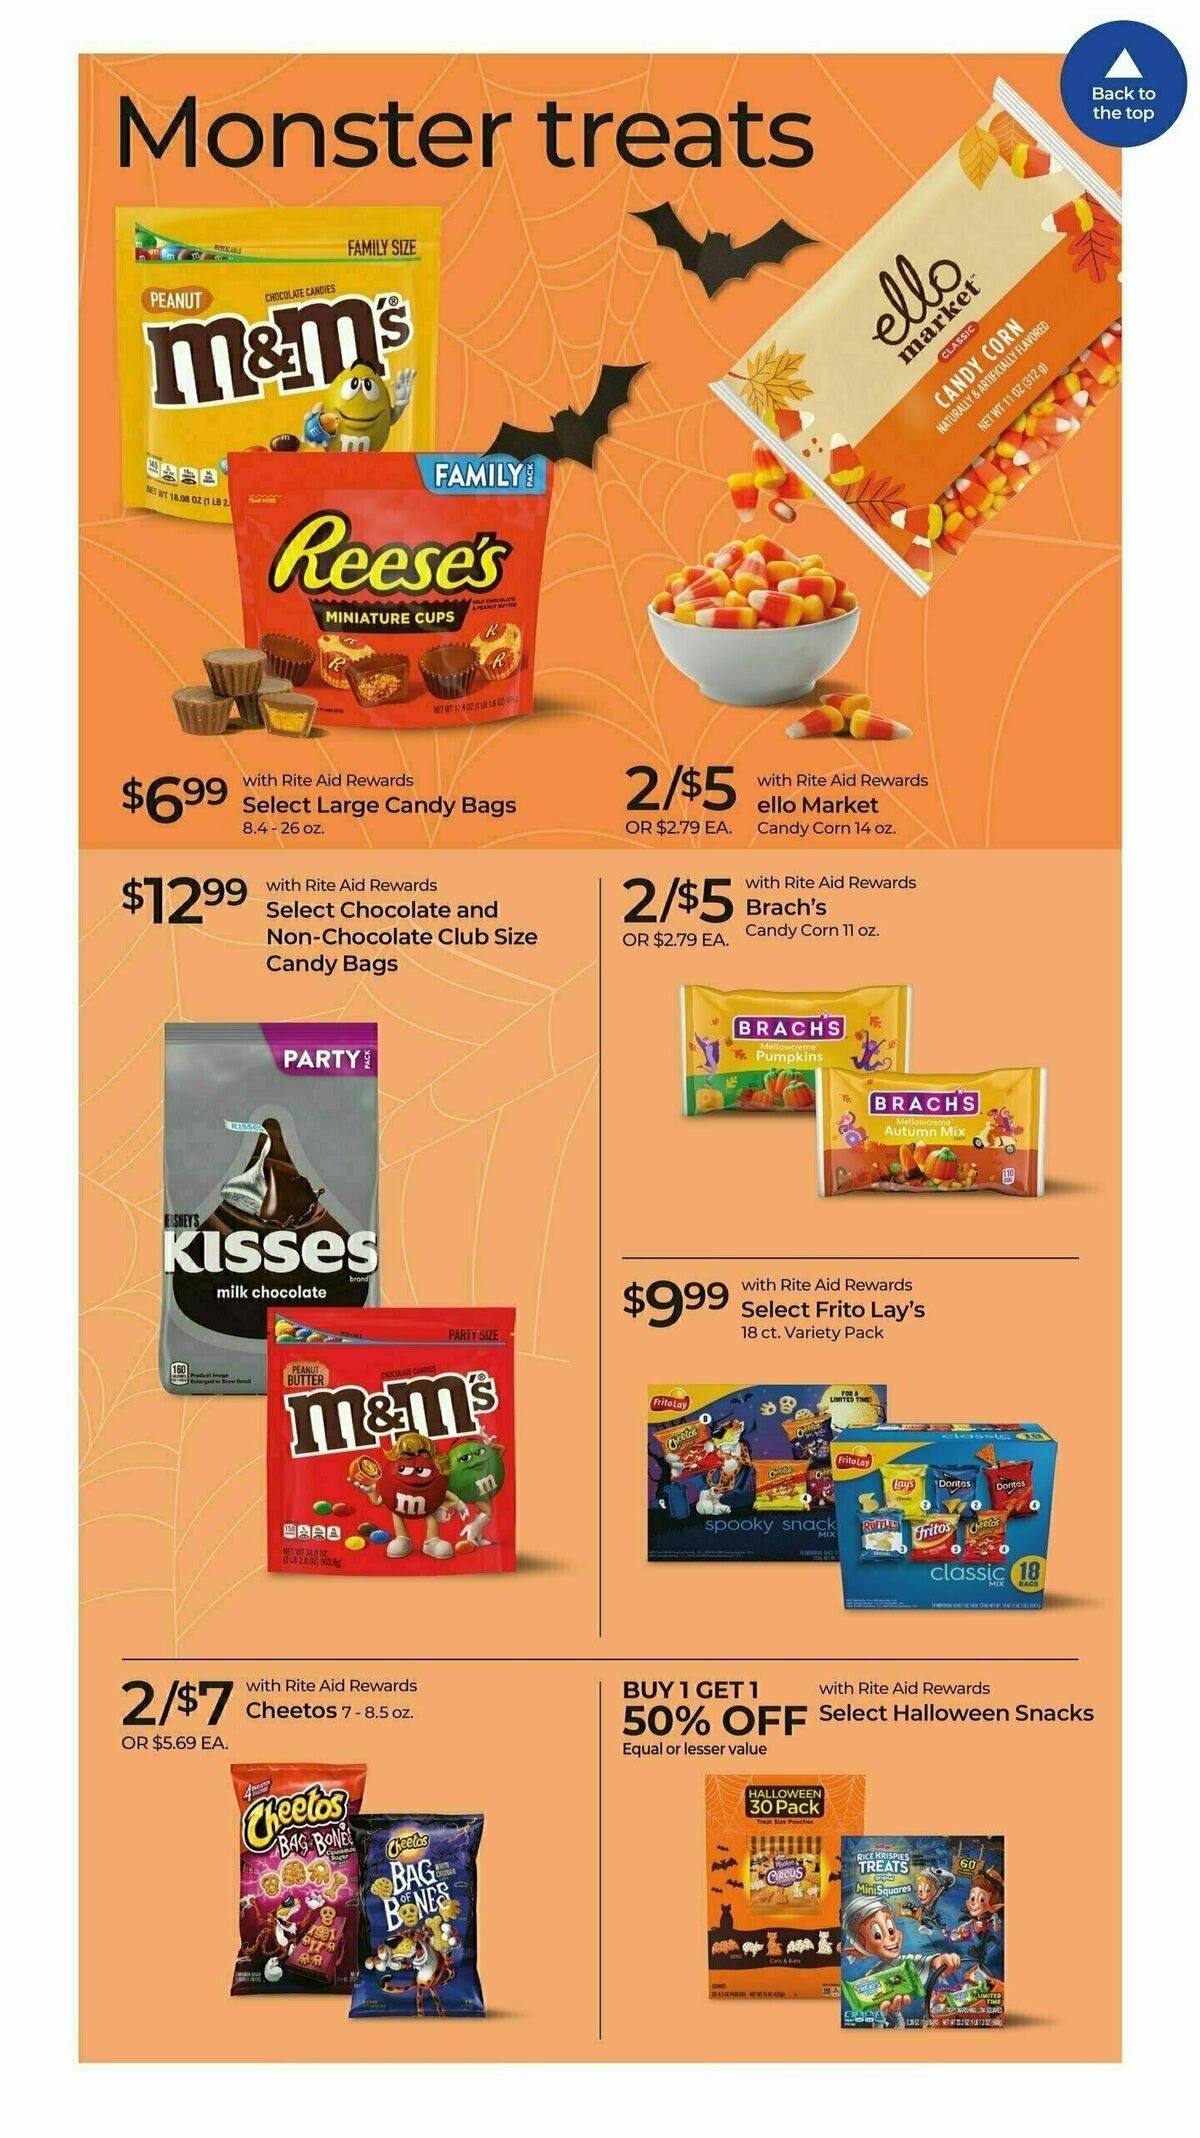 Rite Aid Weekly Ad from October 8